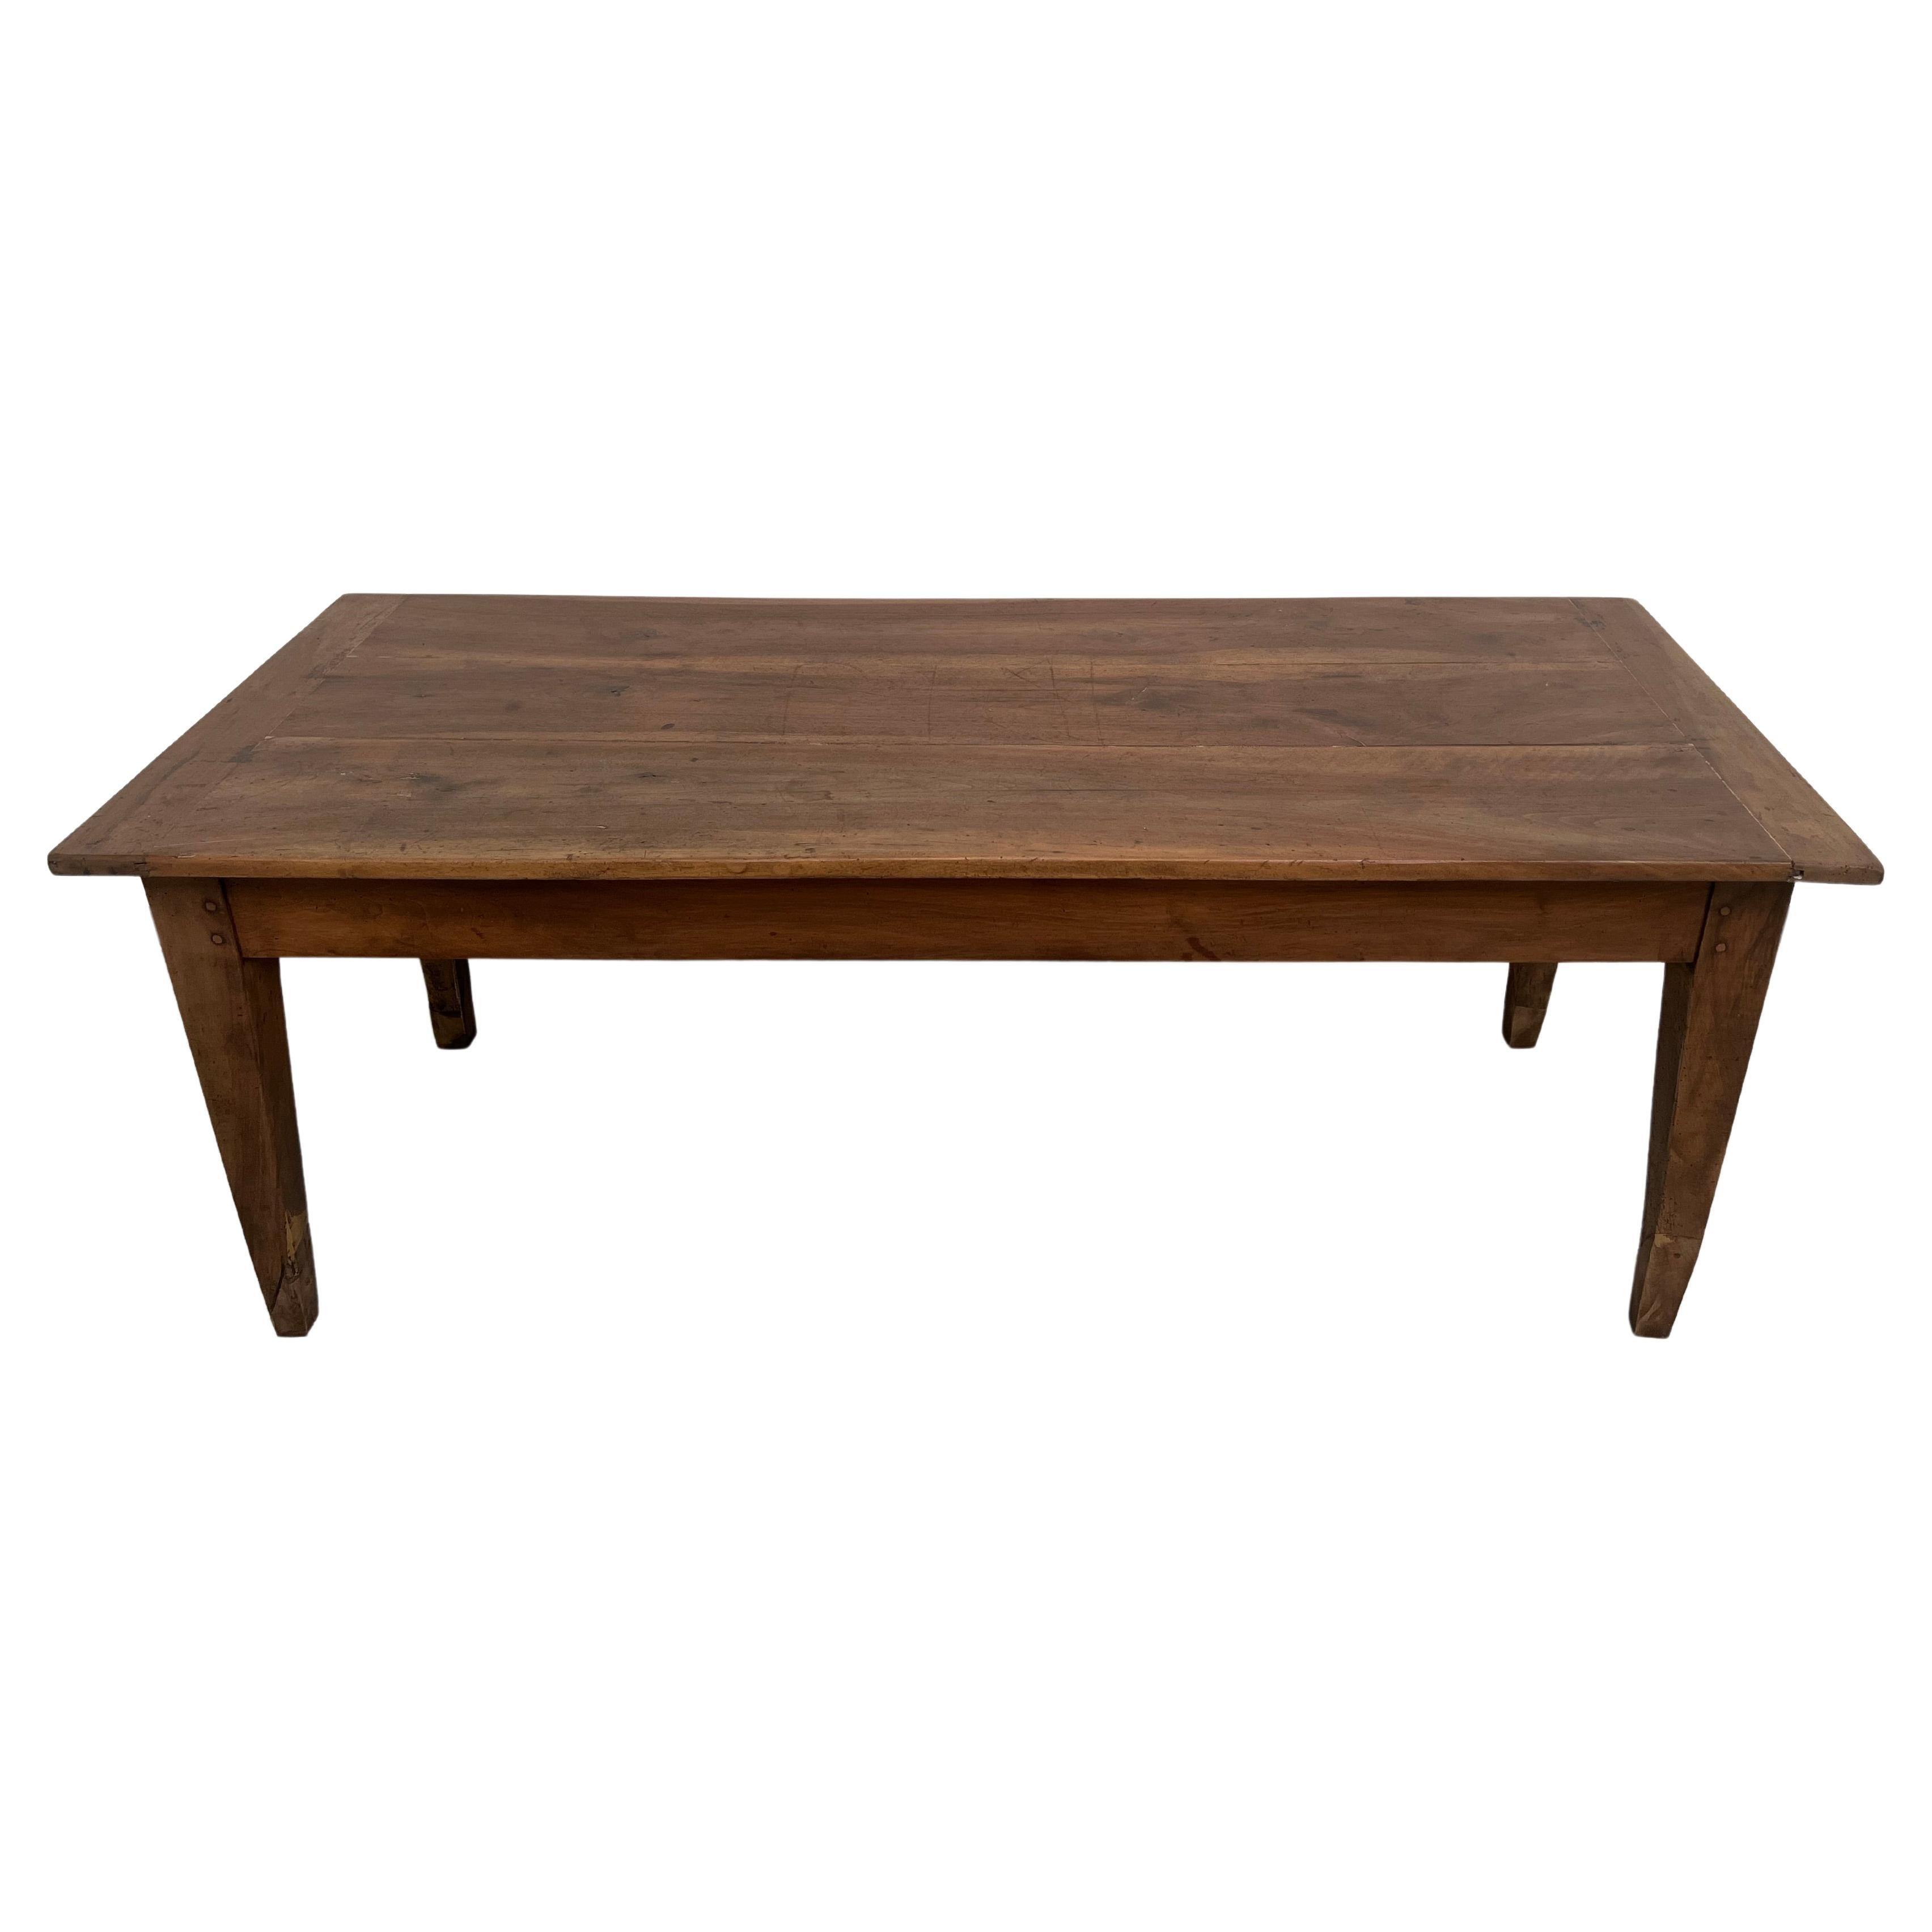 French solid walnut farm table with spindle legs For Sale